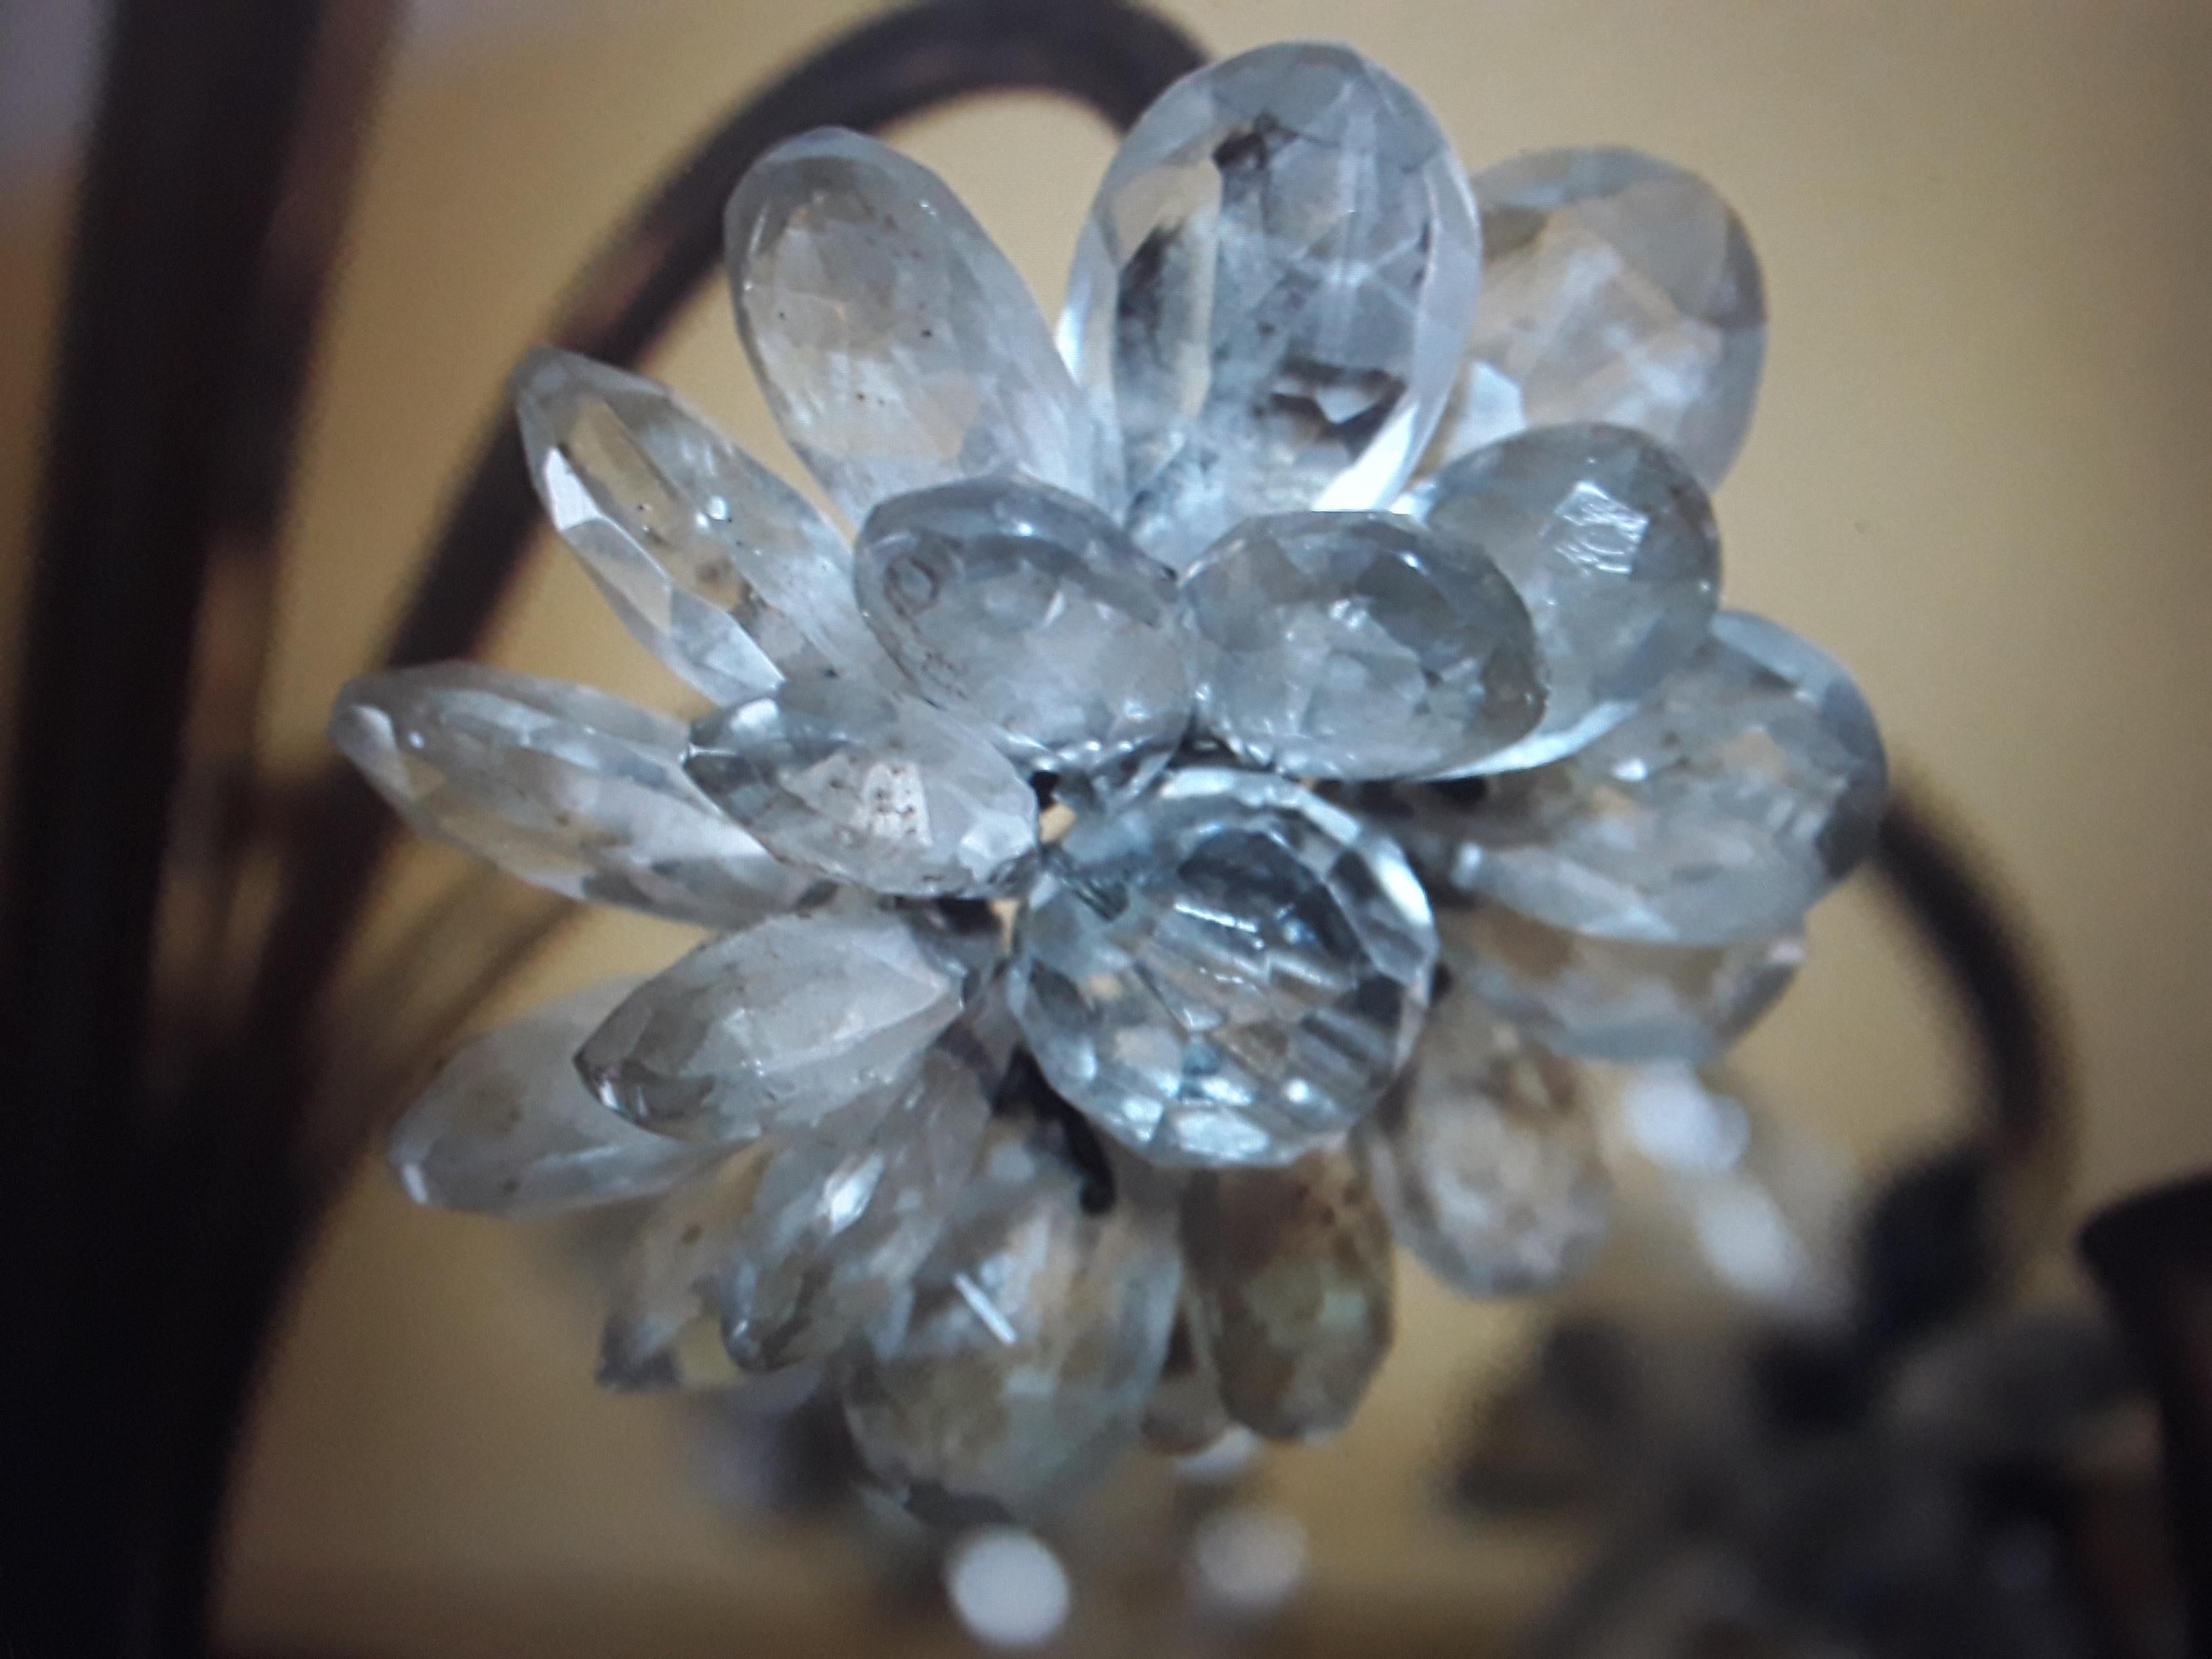 1920's French Art Deco Patinated Iron and Rock Crystal Chandelier. The ironwork is amazing. Many full blooming crystal Flowers. This chandelier is a real beauty!